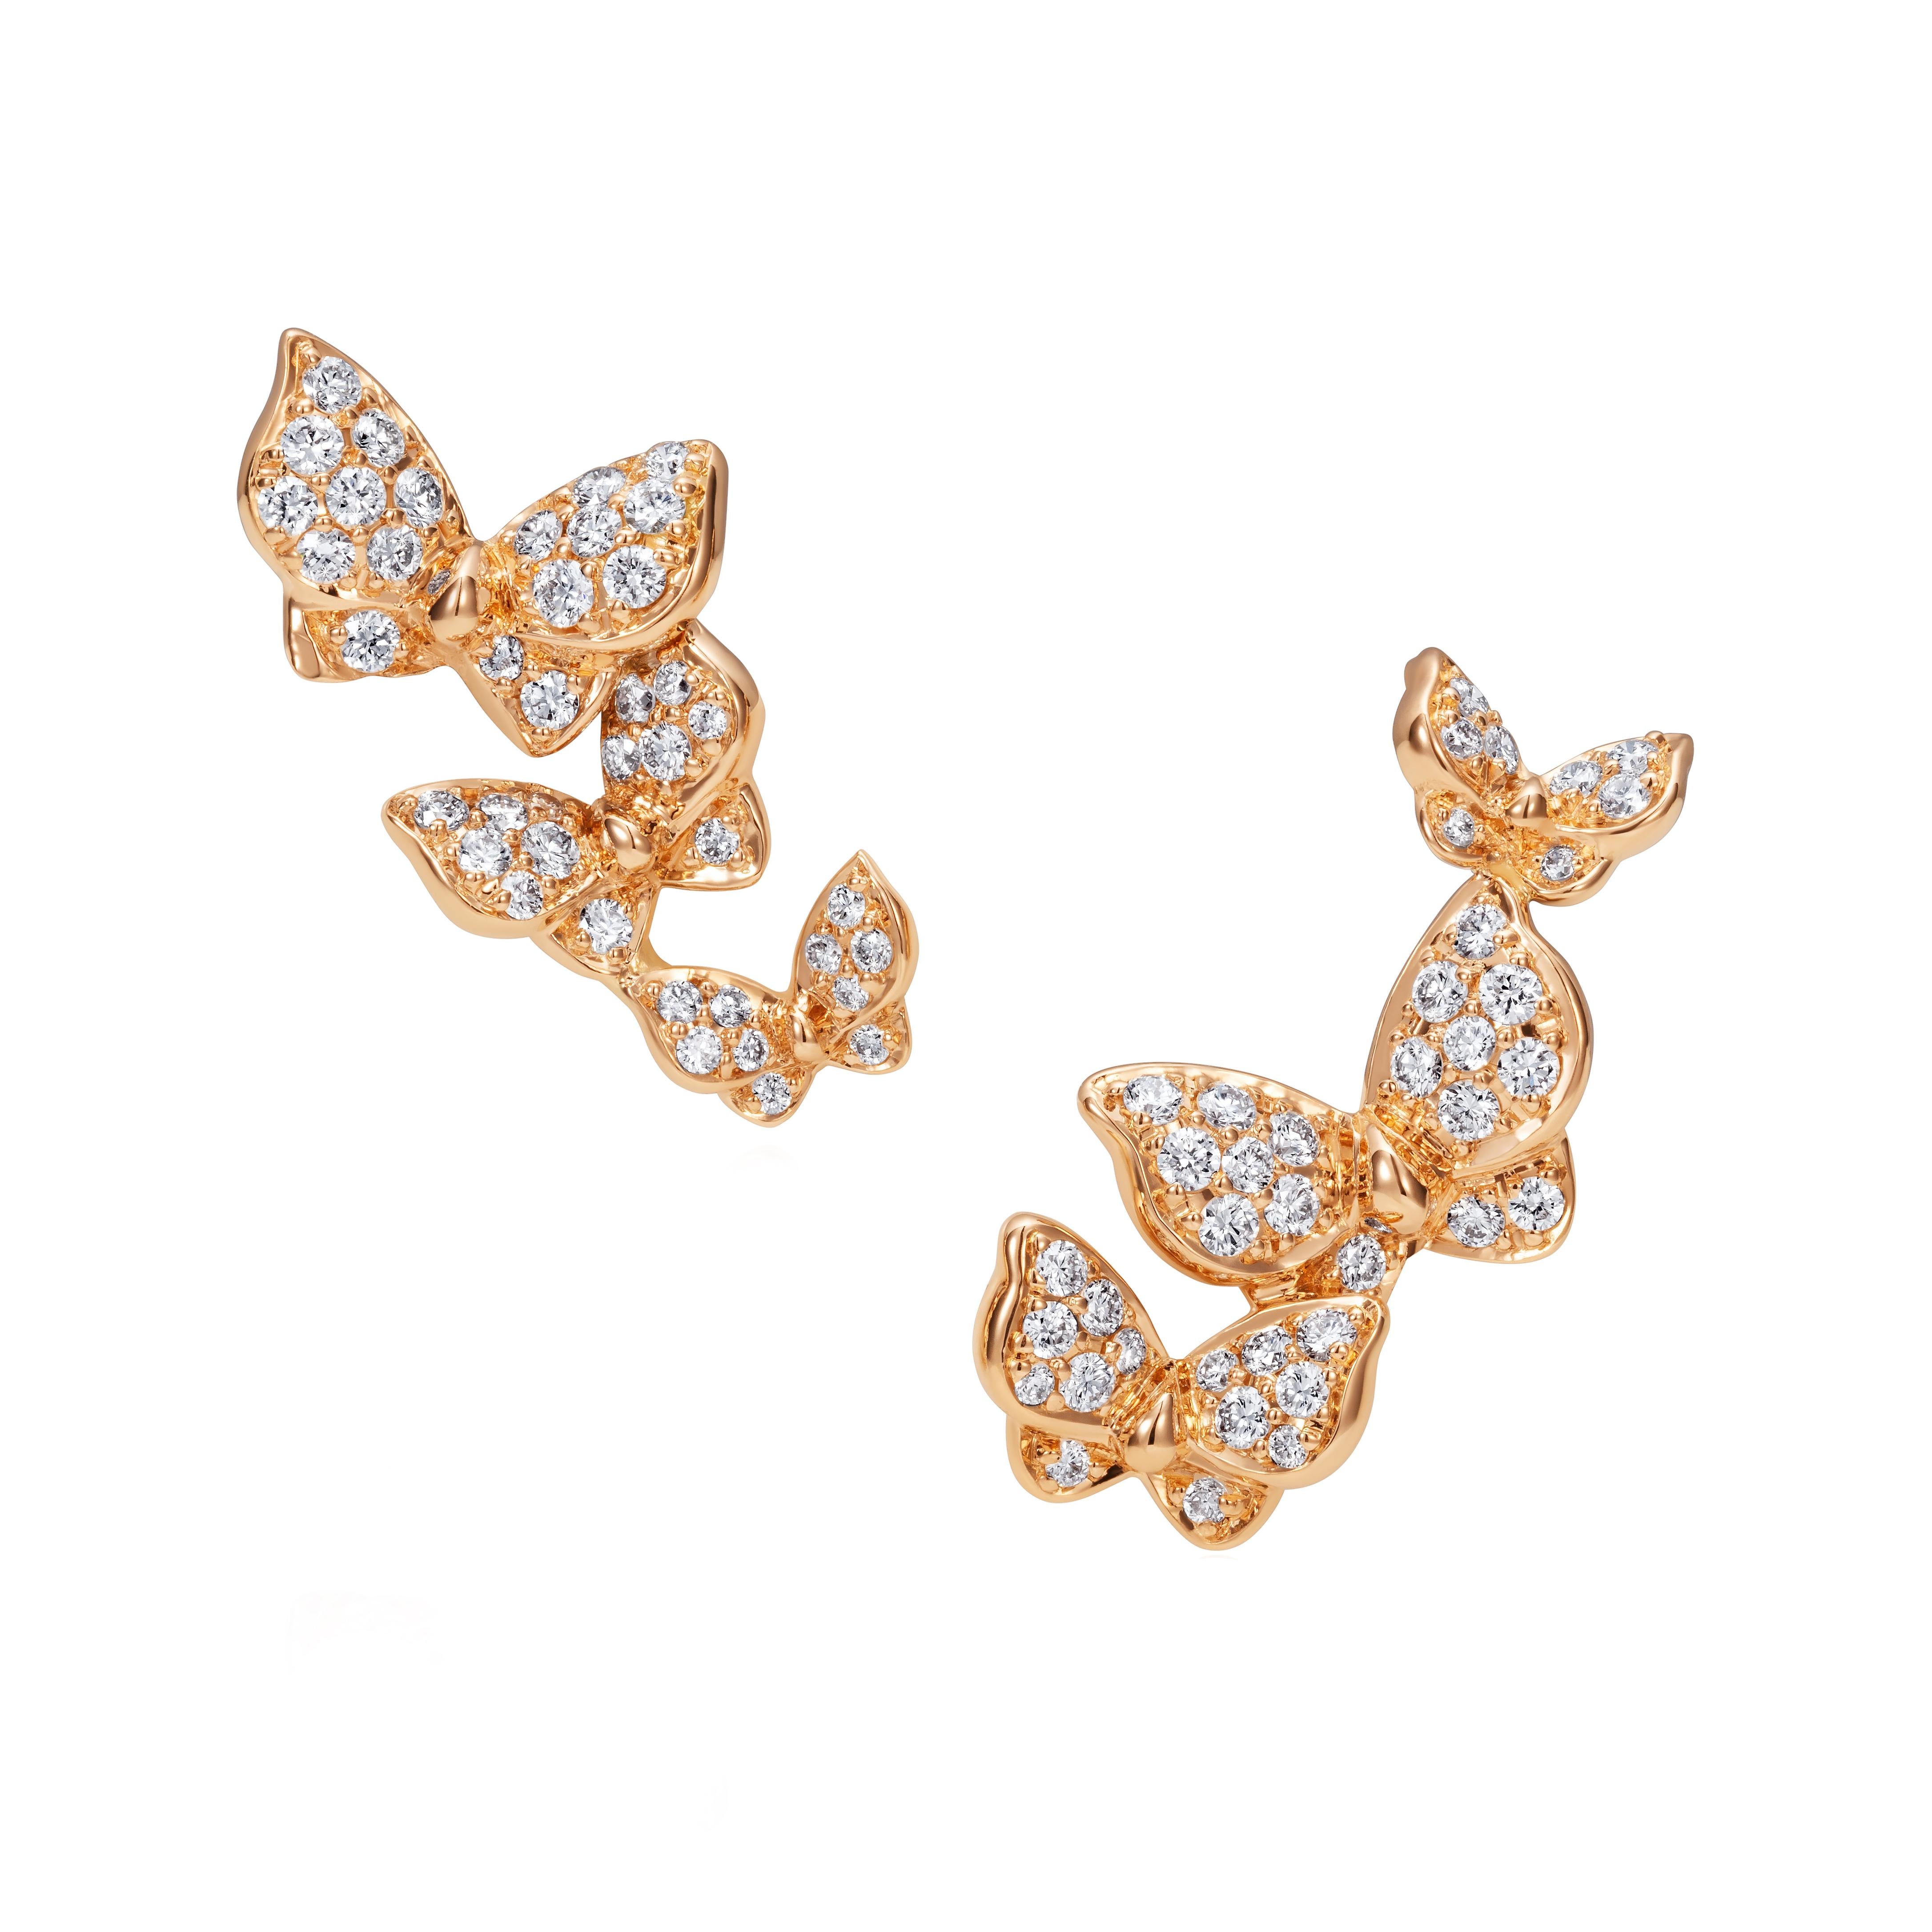 Stud Earrings crafted in 18K Rose Gold
Round Brilliant Diamonds GVS+ = 0.56 carats
Earring size = 18 x 10 mm

The video contains item ref LU638318201182 and LU638318201222
However, this listing is for item LU638318201182 only.
If you would like to